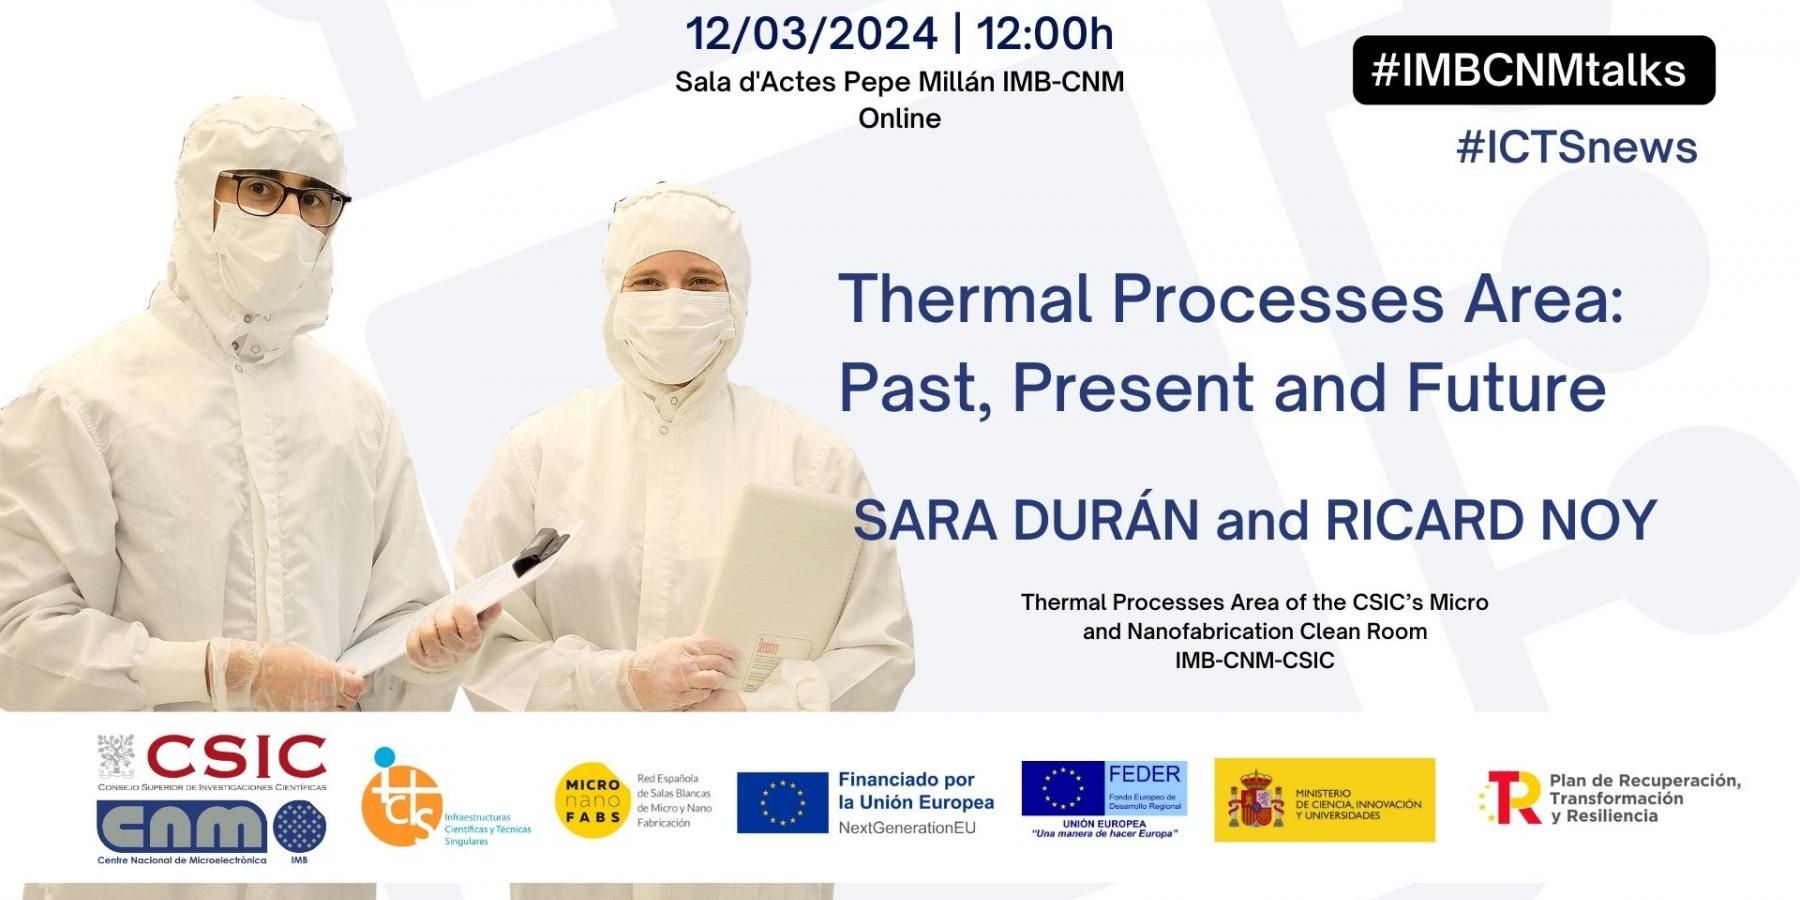 Thermal Processes Talk on March 12th - Sara Duran and Ricard Noy